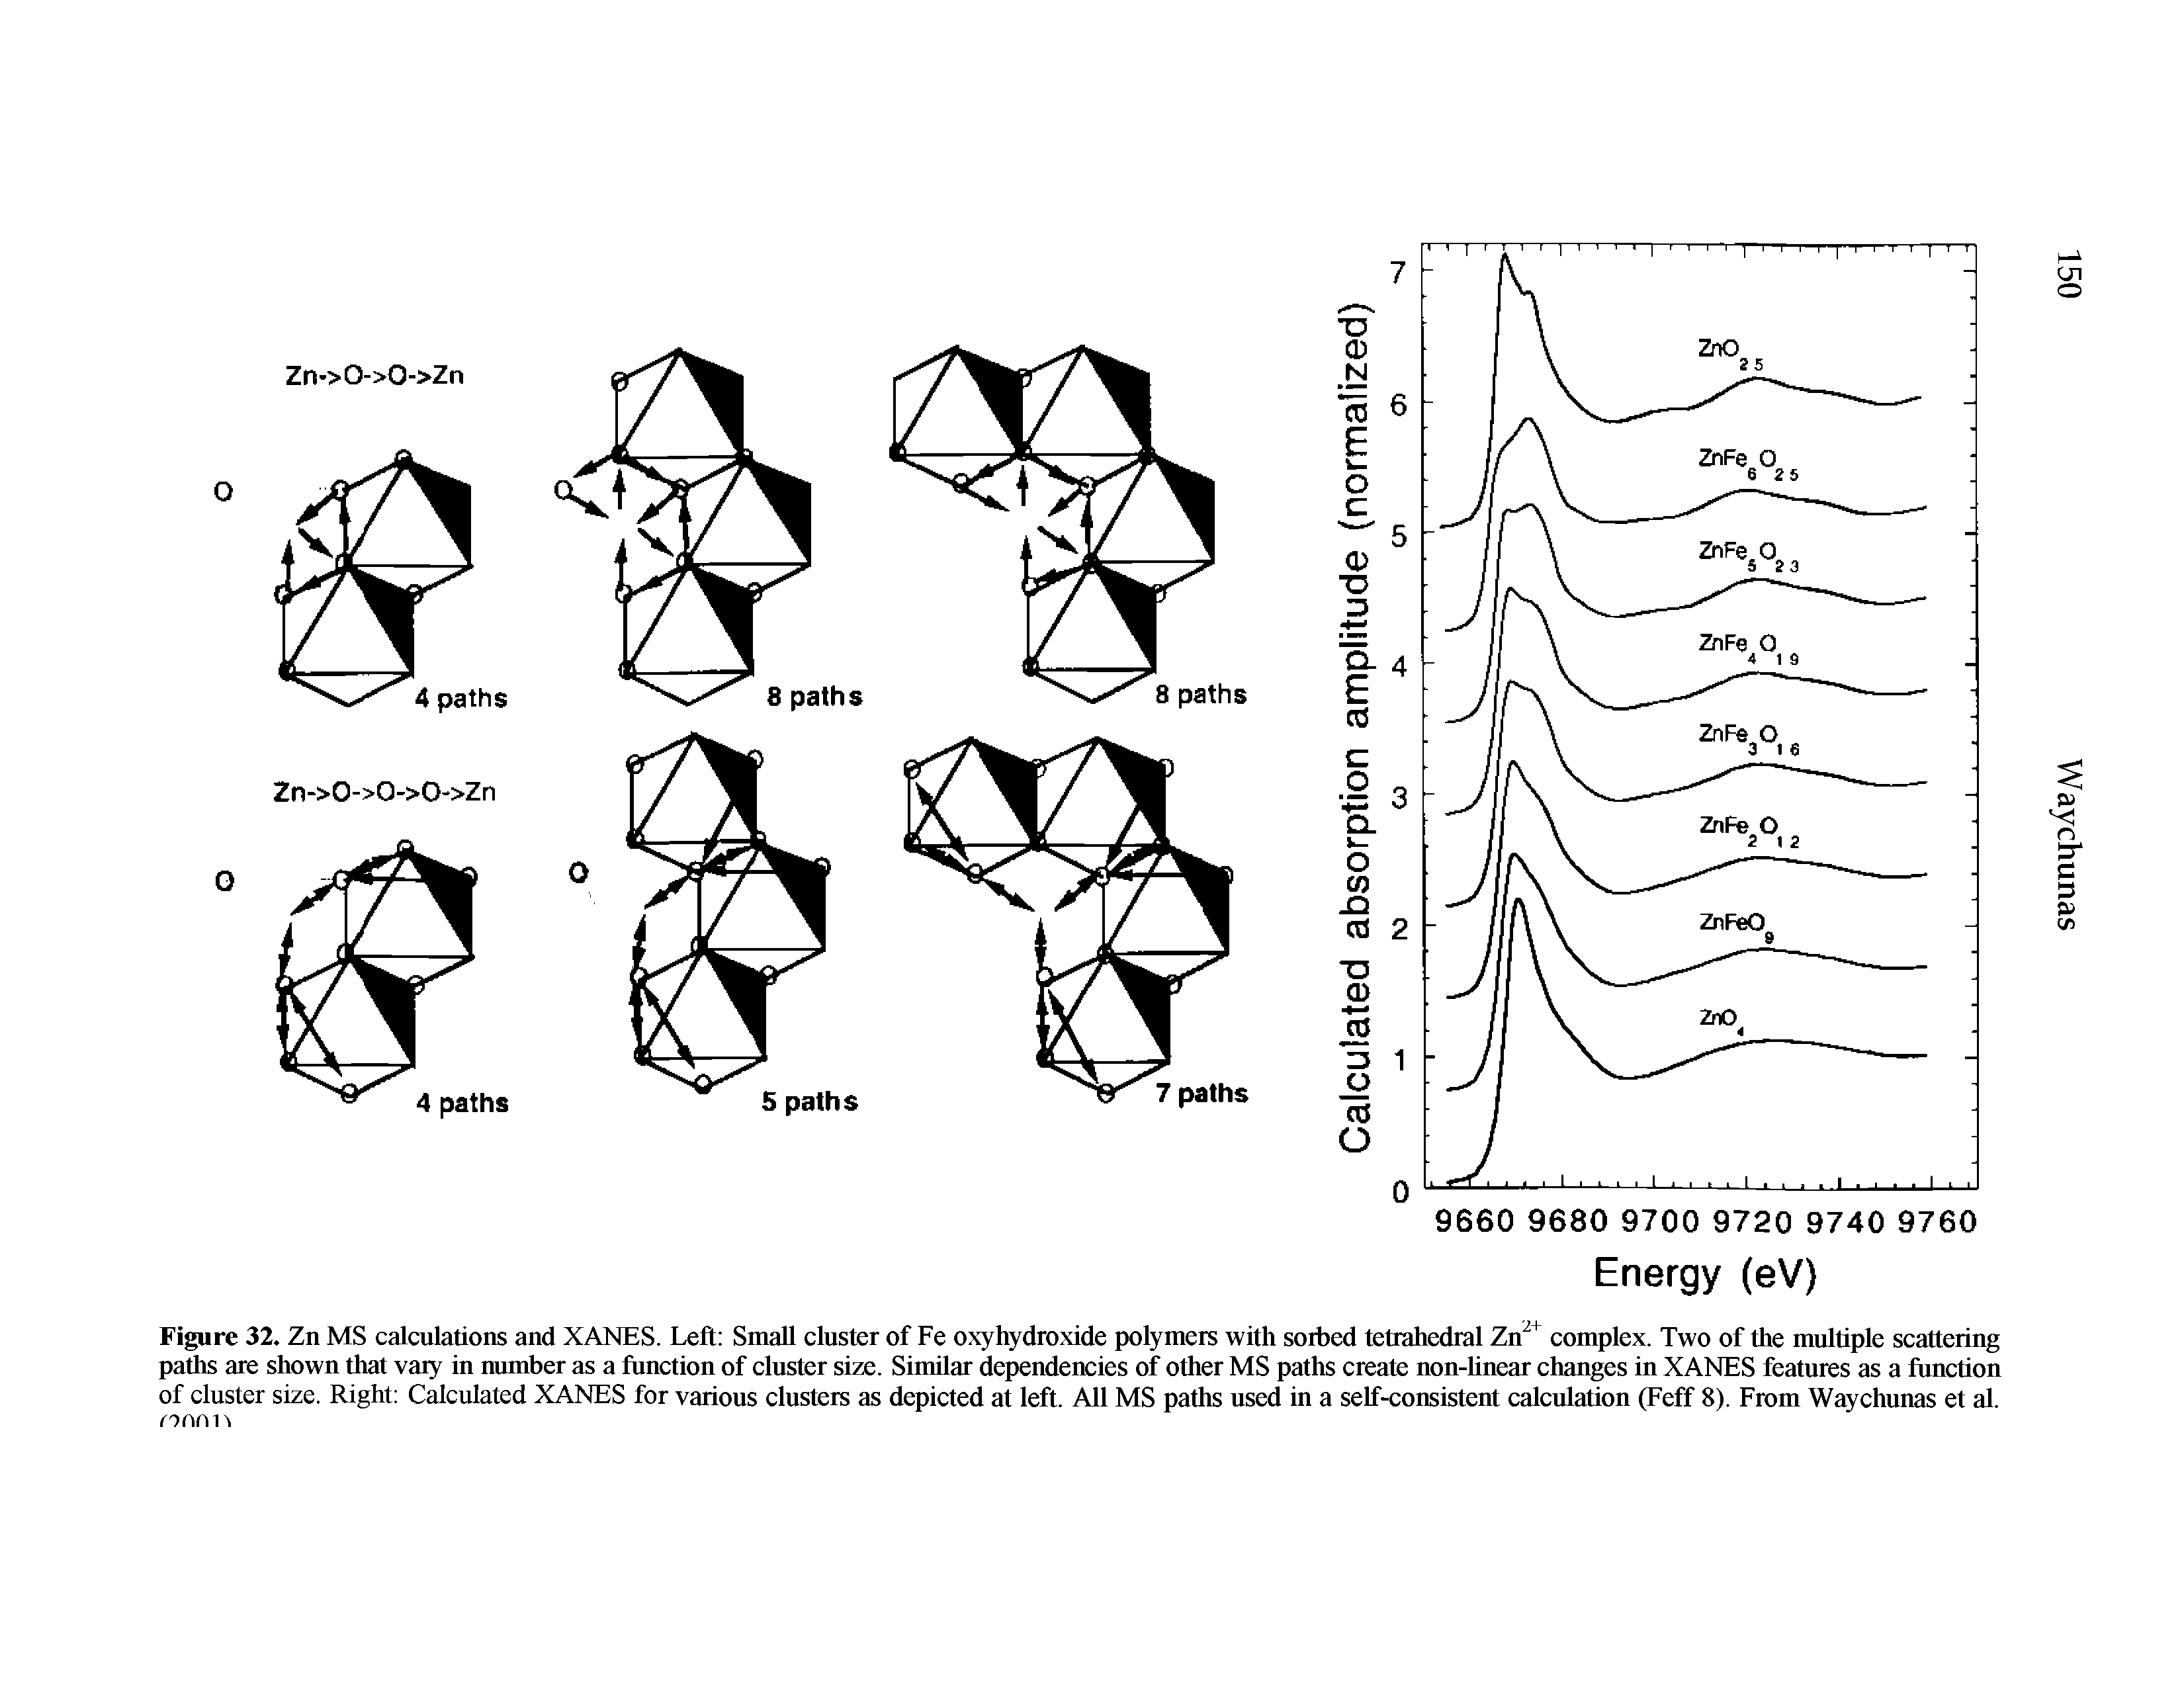 Figure 32. Zn MS calculations and XANES. Left Small cluster of Fe oxyhydroxide polymers with sorbed tetrahedral complex. Two of the multiple scattering paths are shown that vaiy in number as a function of cluster size. Similar dependencies of other MS paths create non-hnear changes in XANES features as a function of cluster size. Right Calculated XANES for various clusters as depicted at left. All MS paths used in a self-consistent ealculation (Feff 8). From Waychunas et al.